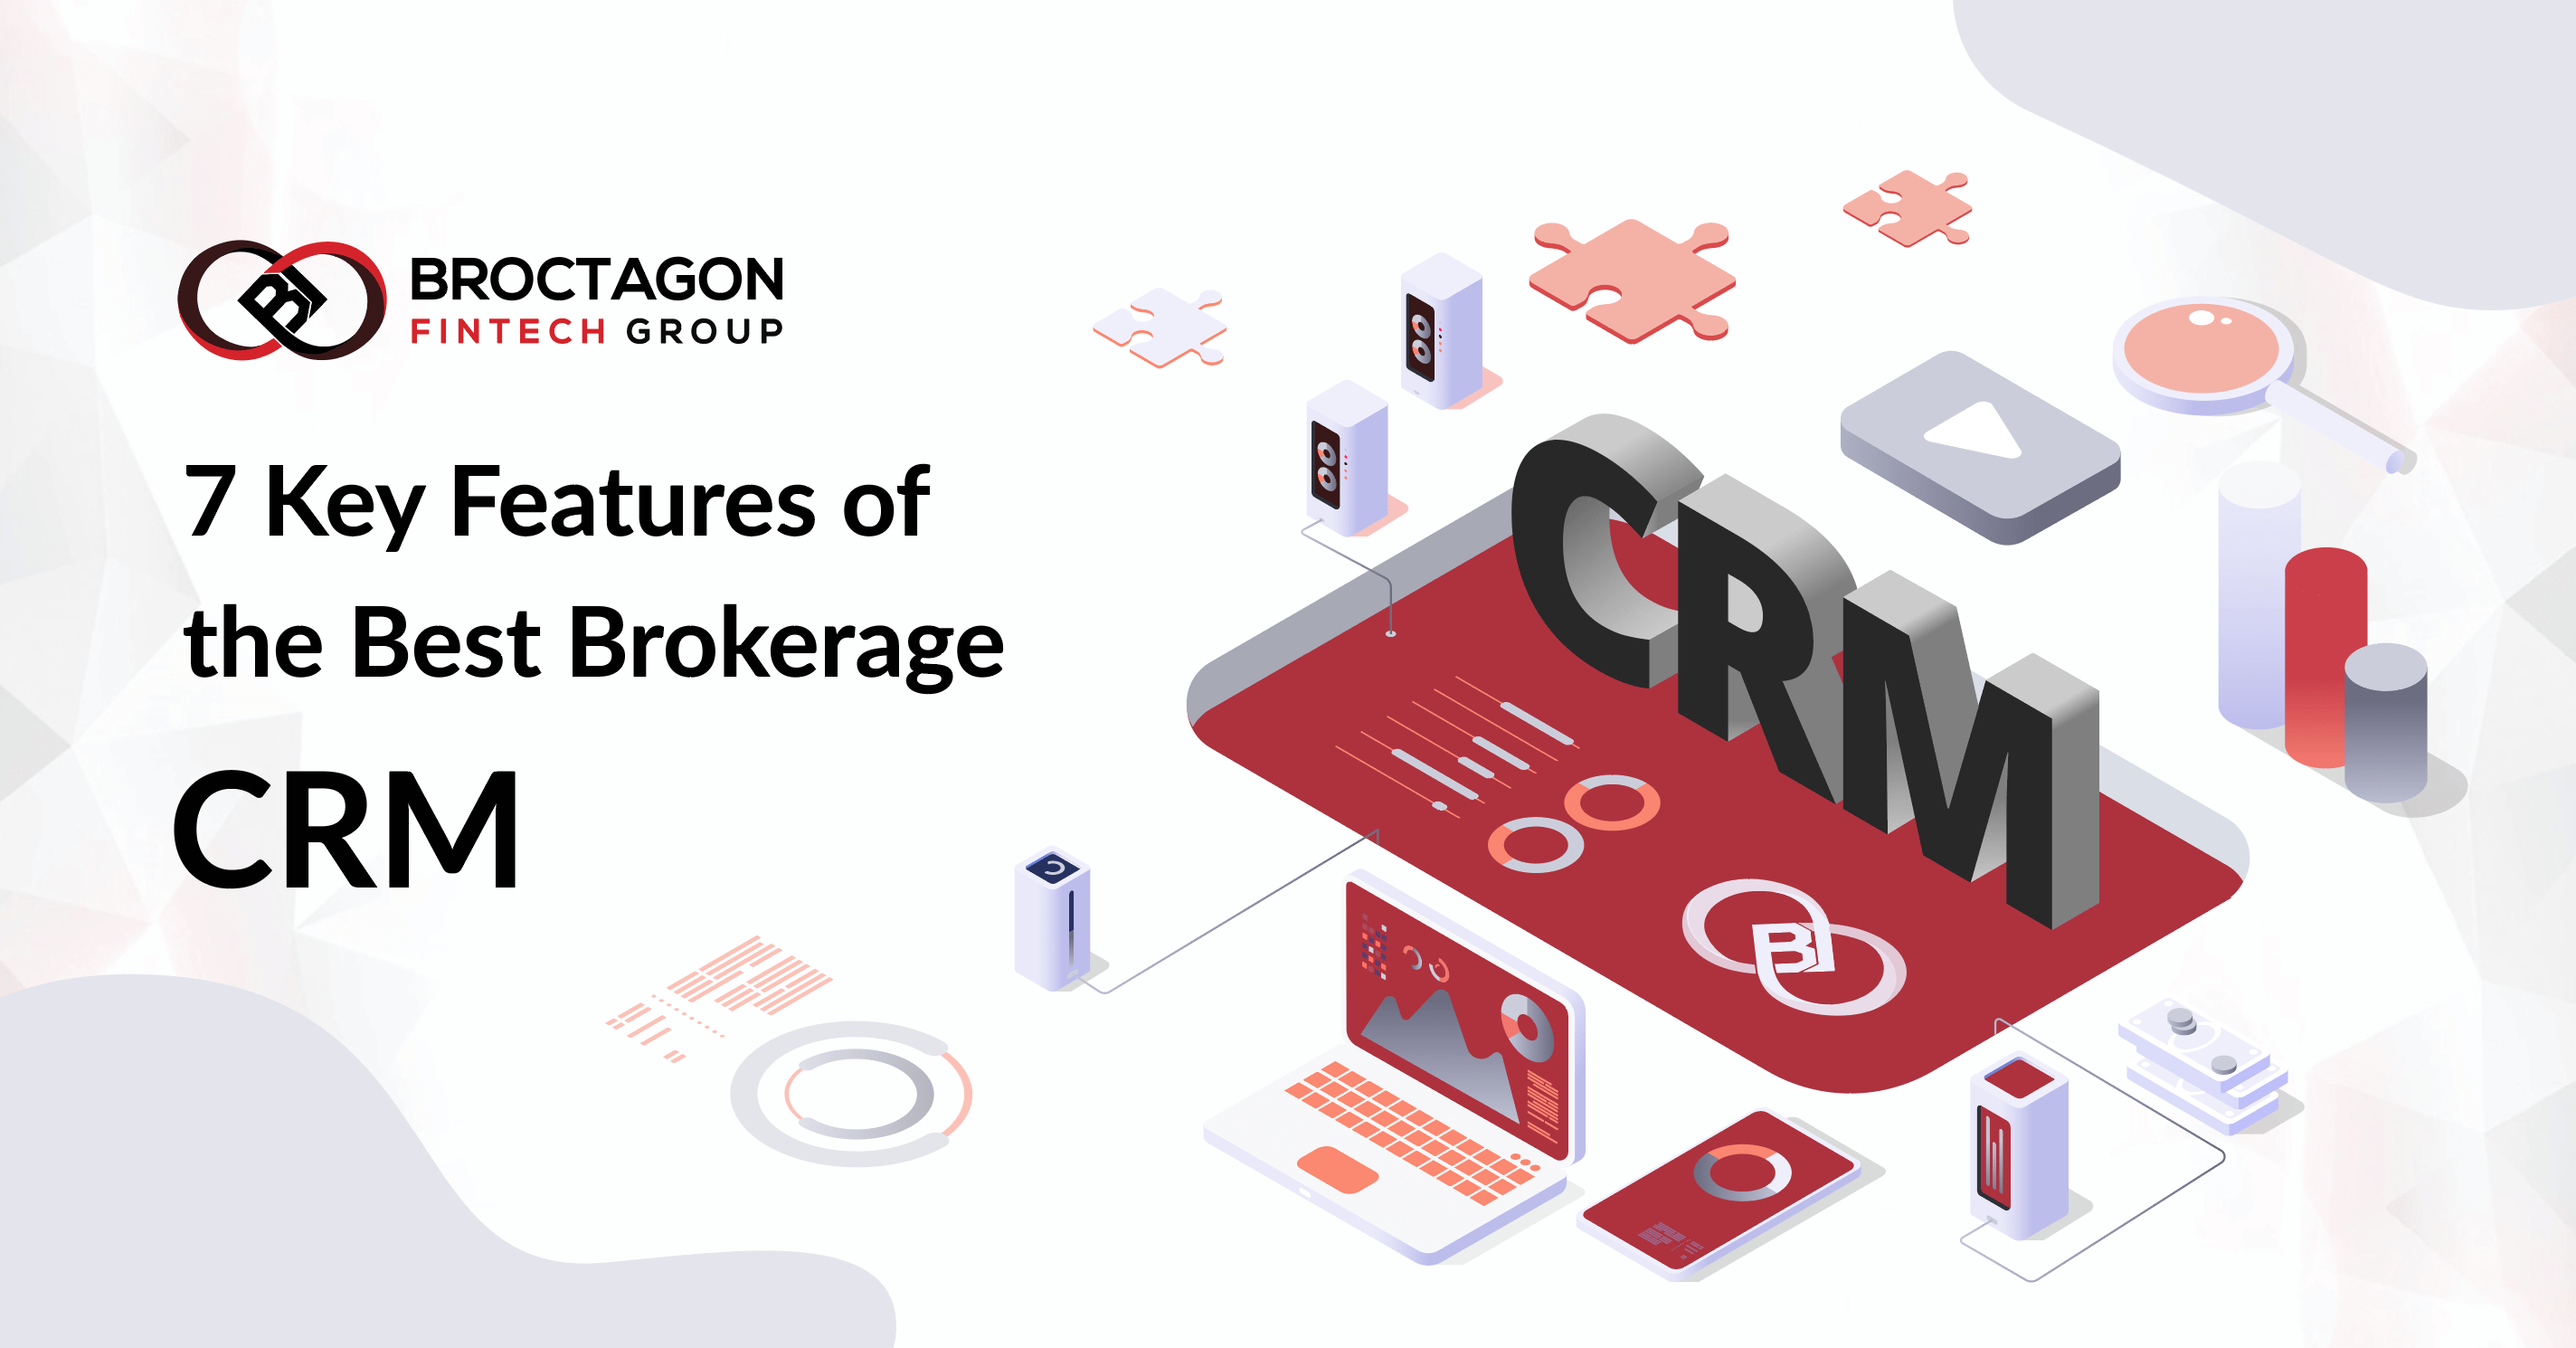 7 Key Features of the Best Brokerage CRM